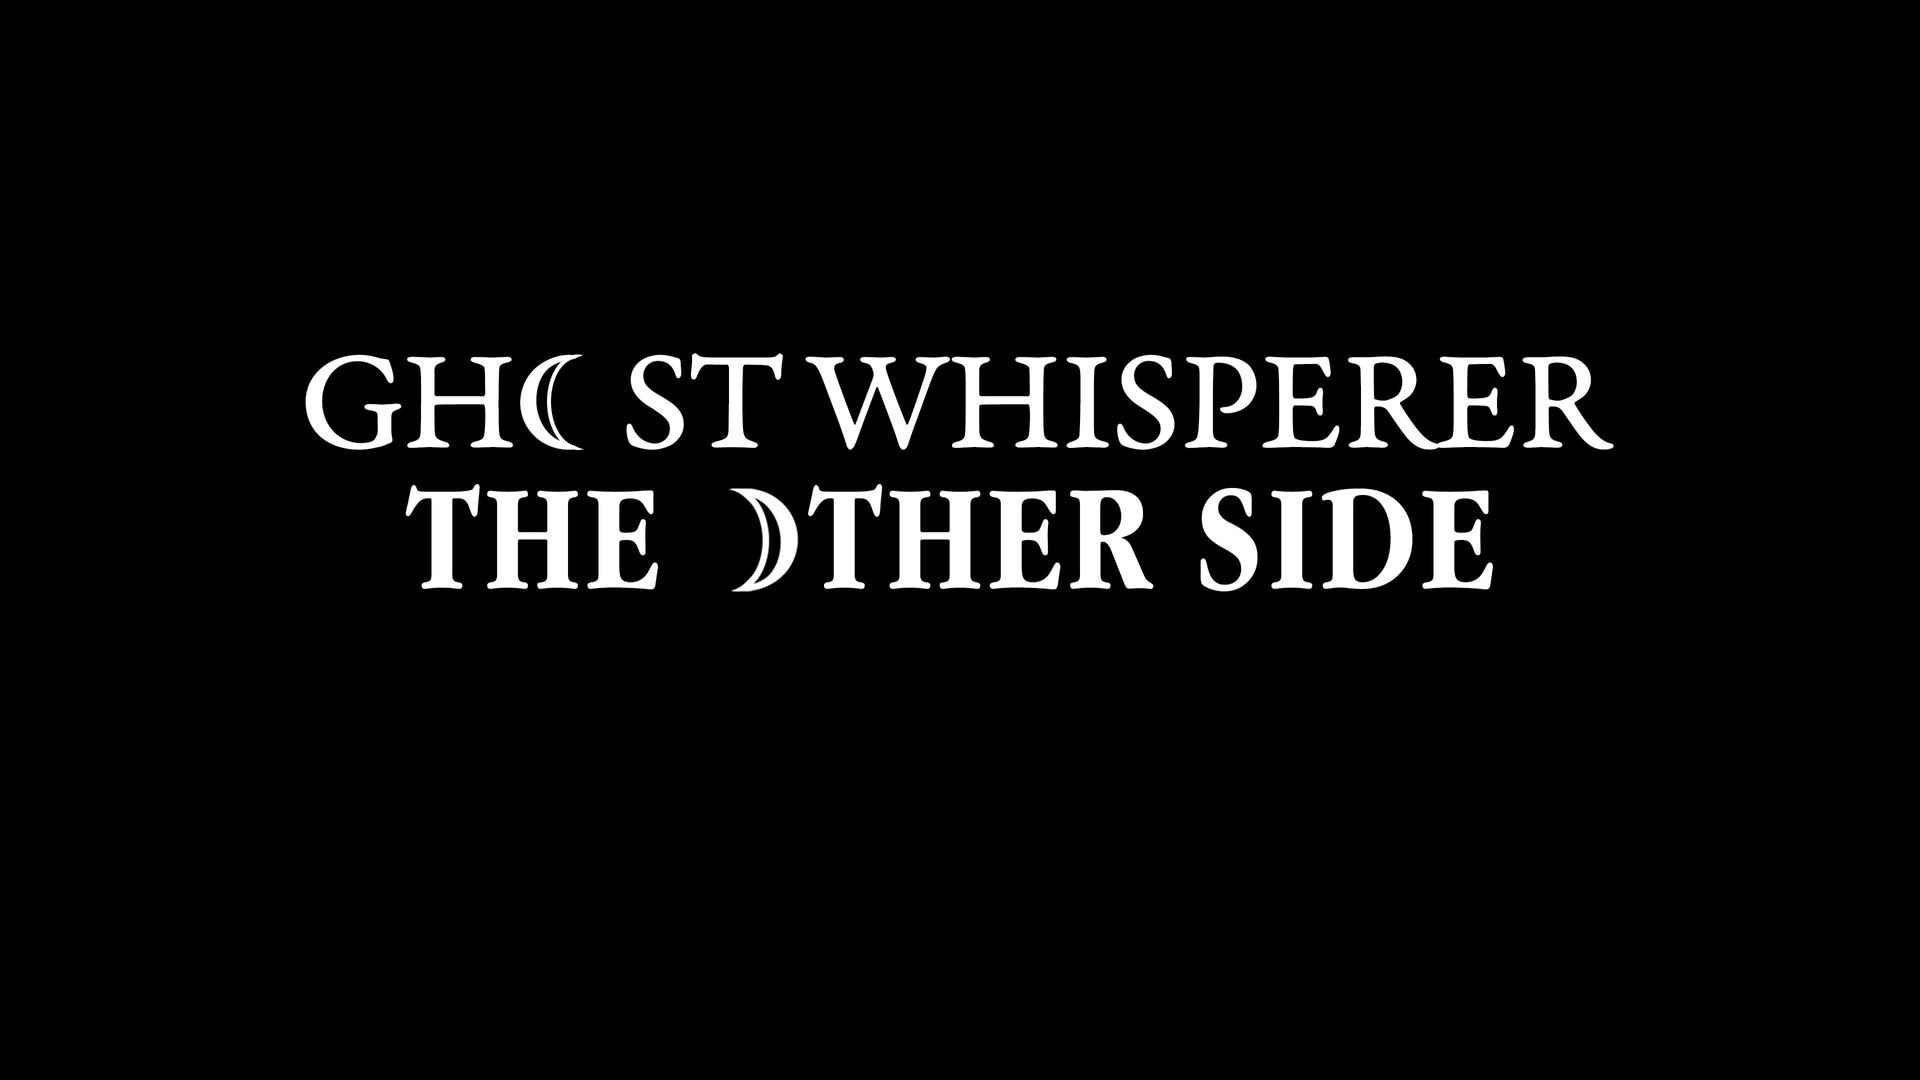 Ghost Whisperer: The Other Side background